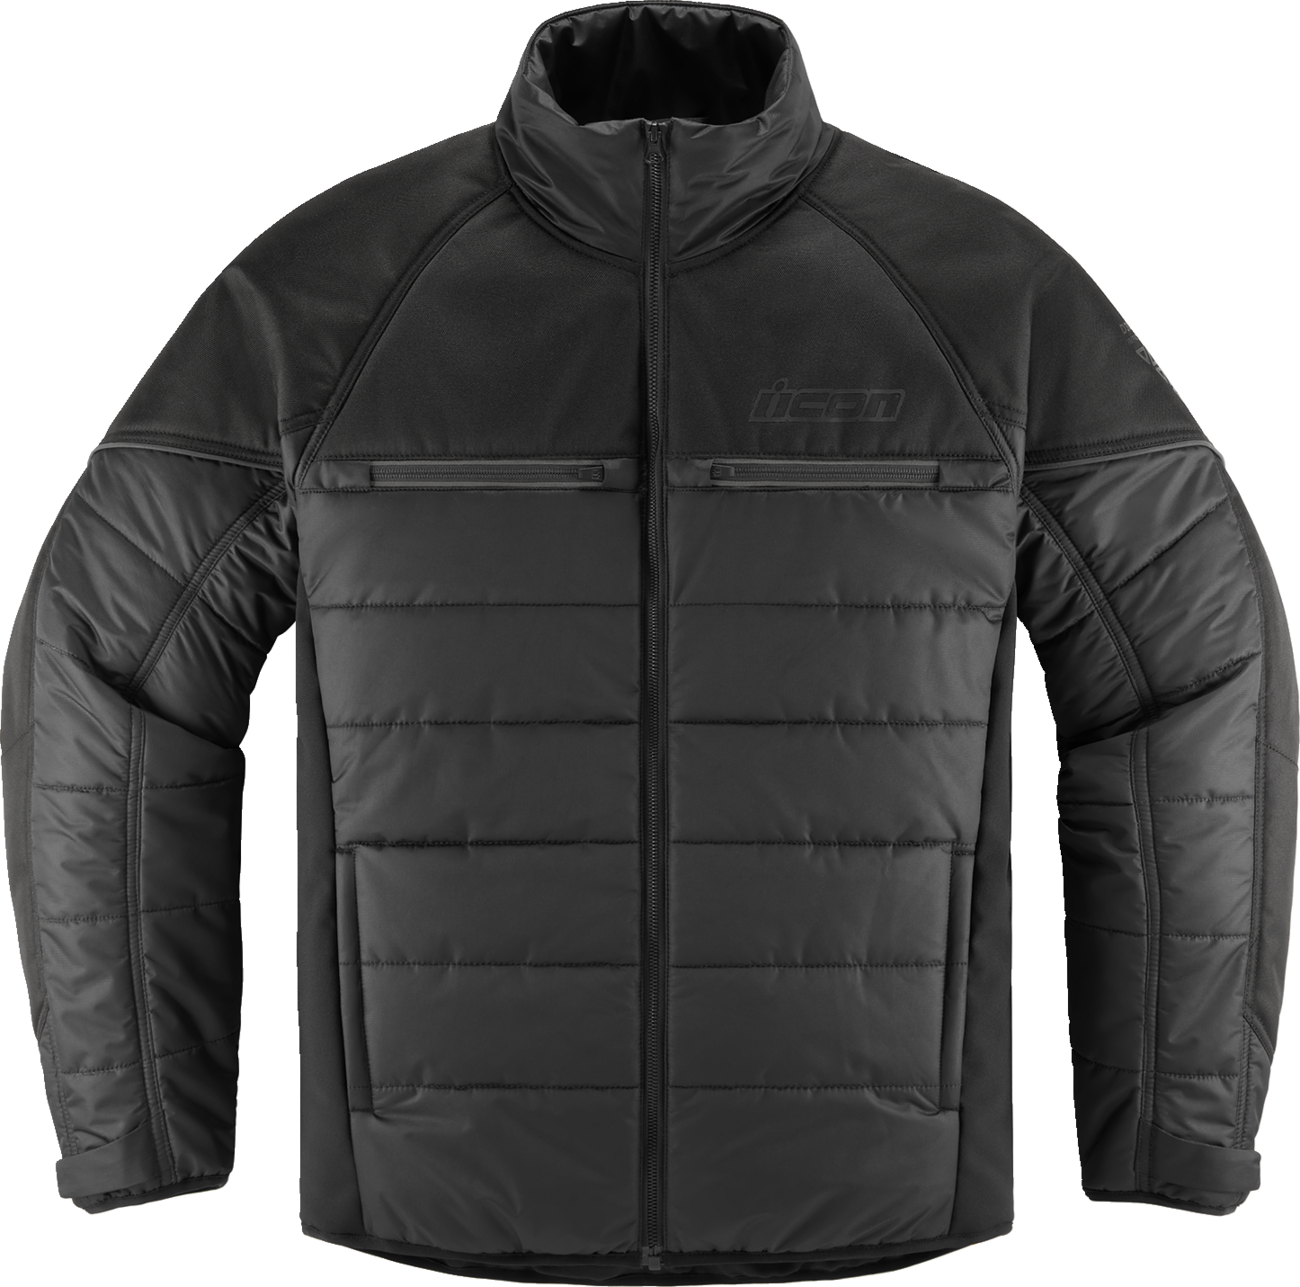 ICON Ghost Puffer Jacket - Black/Charcoal - XL 2820-6193